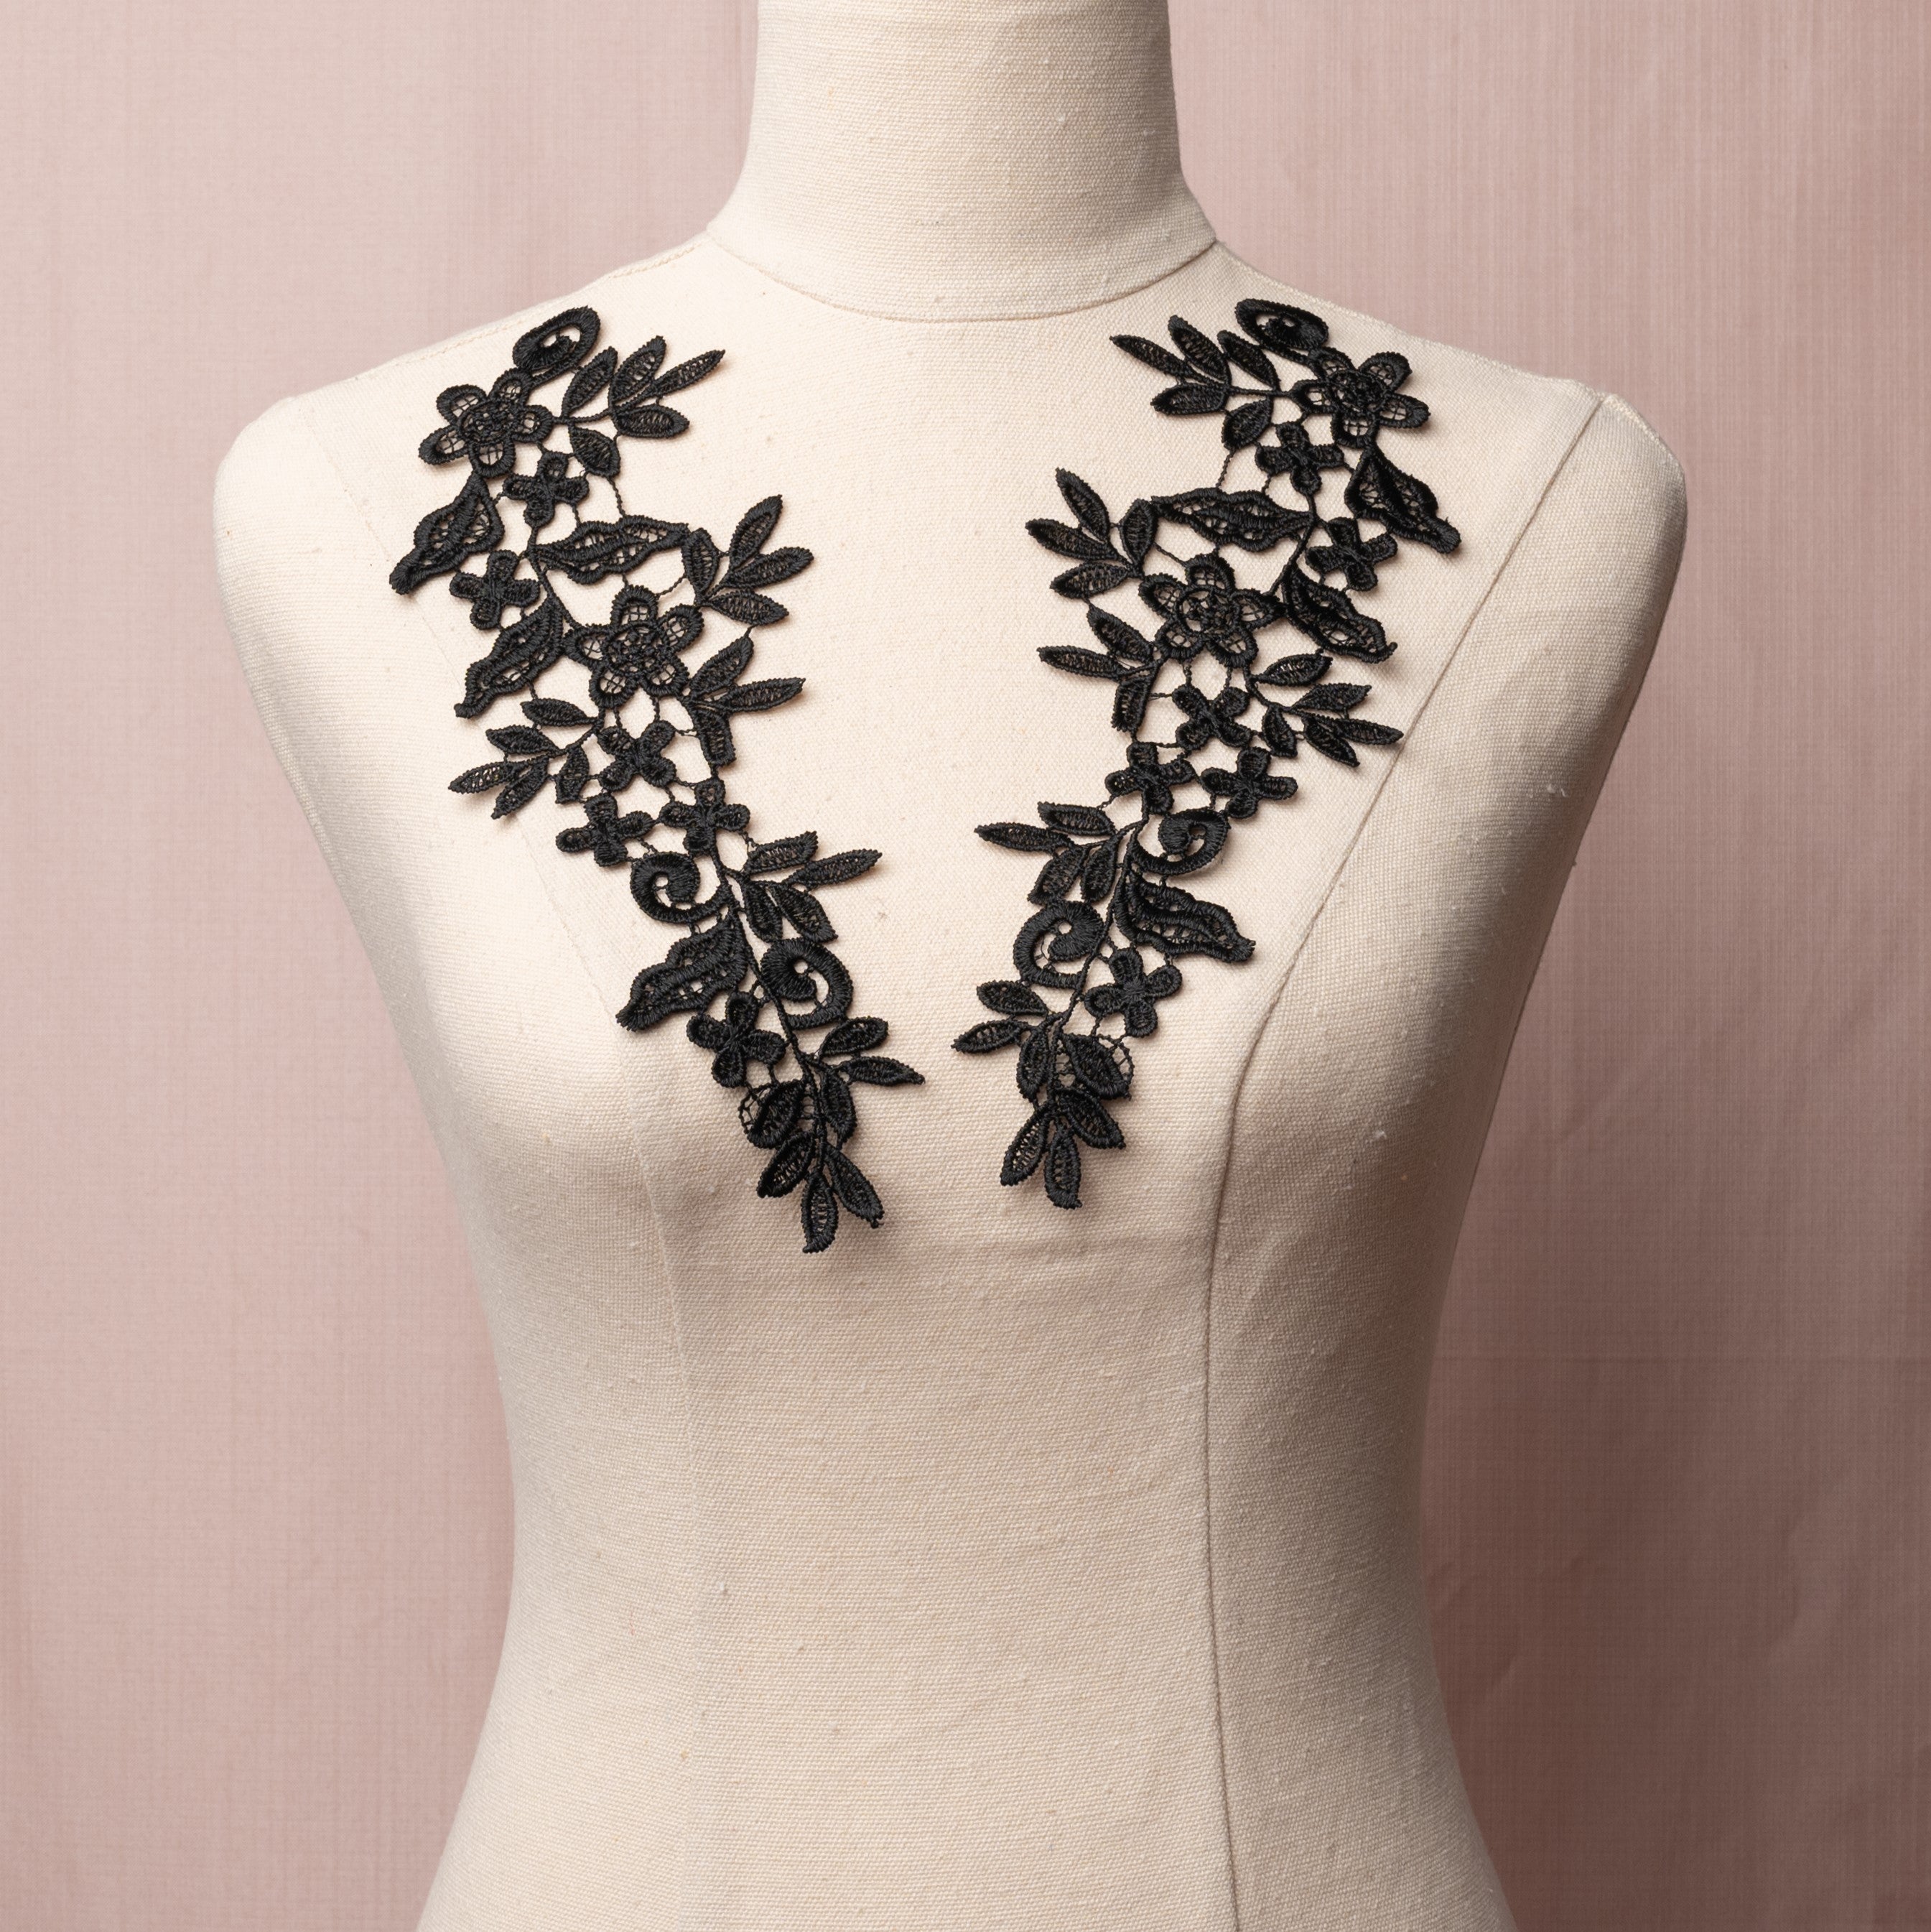 Black applique with 3D flowers and crystals - Applique - lace